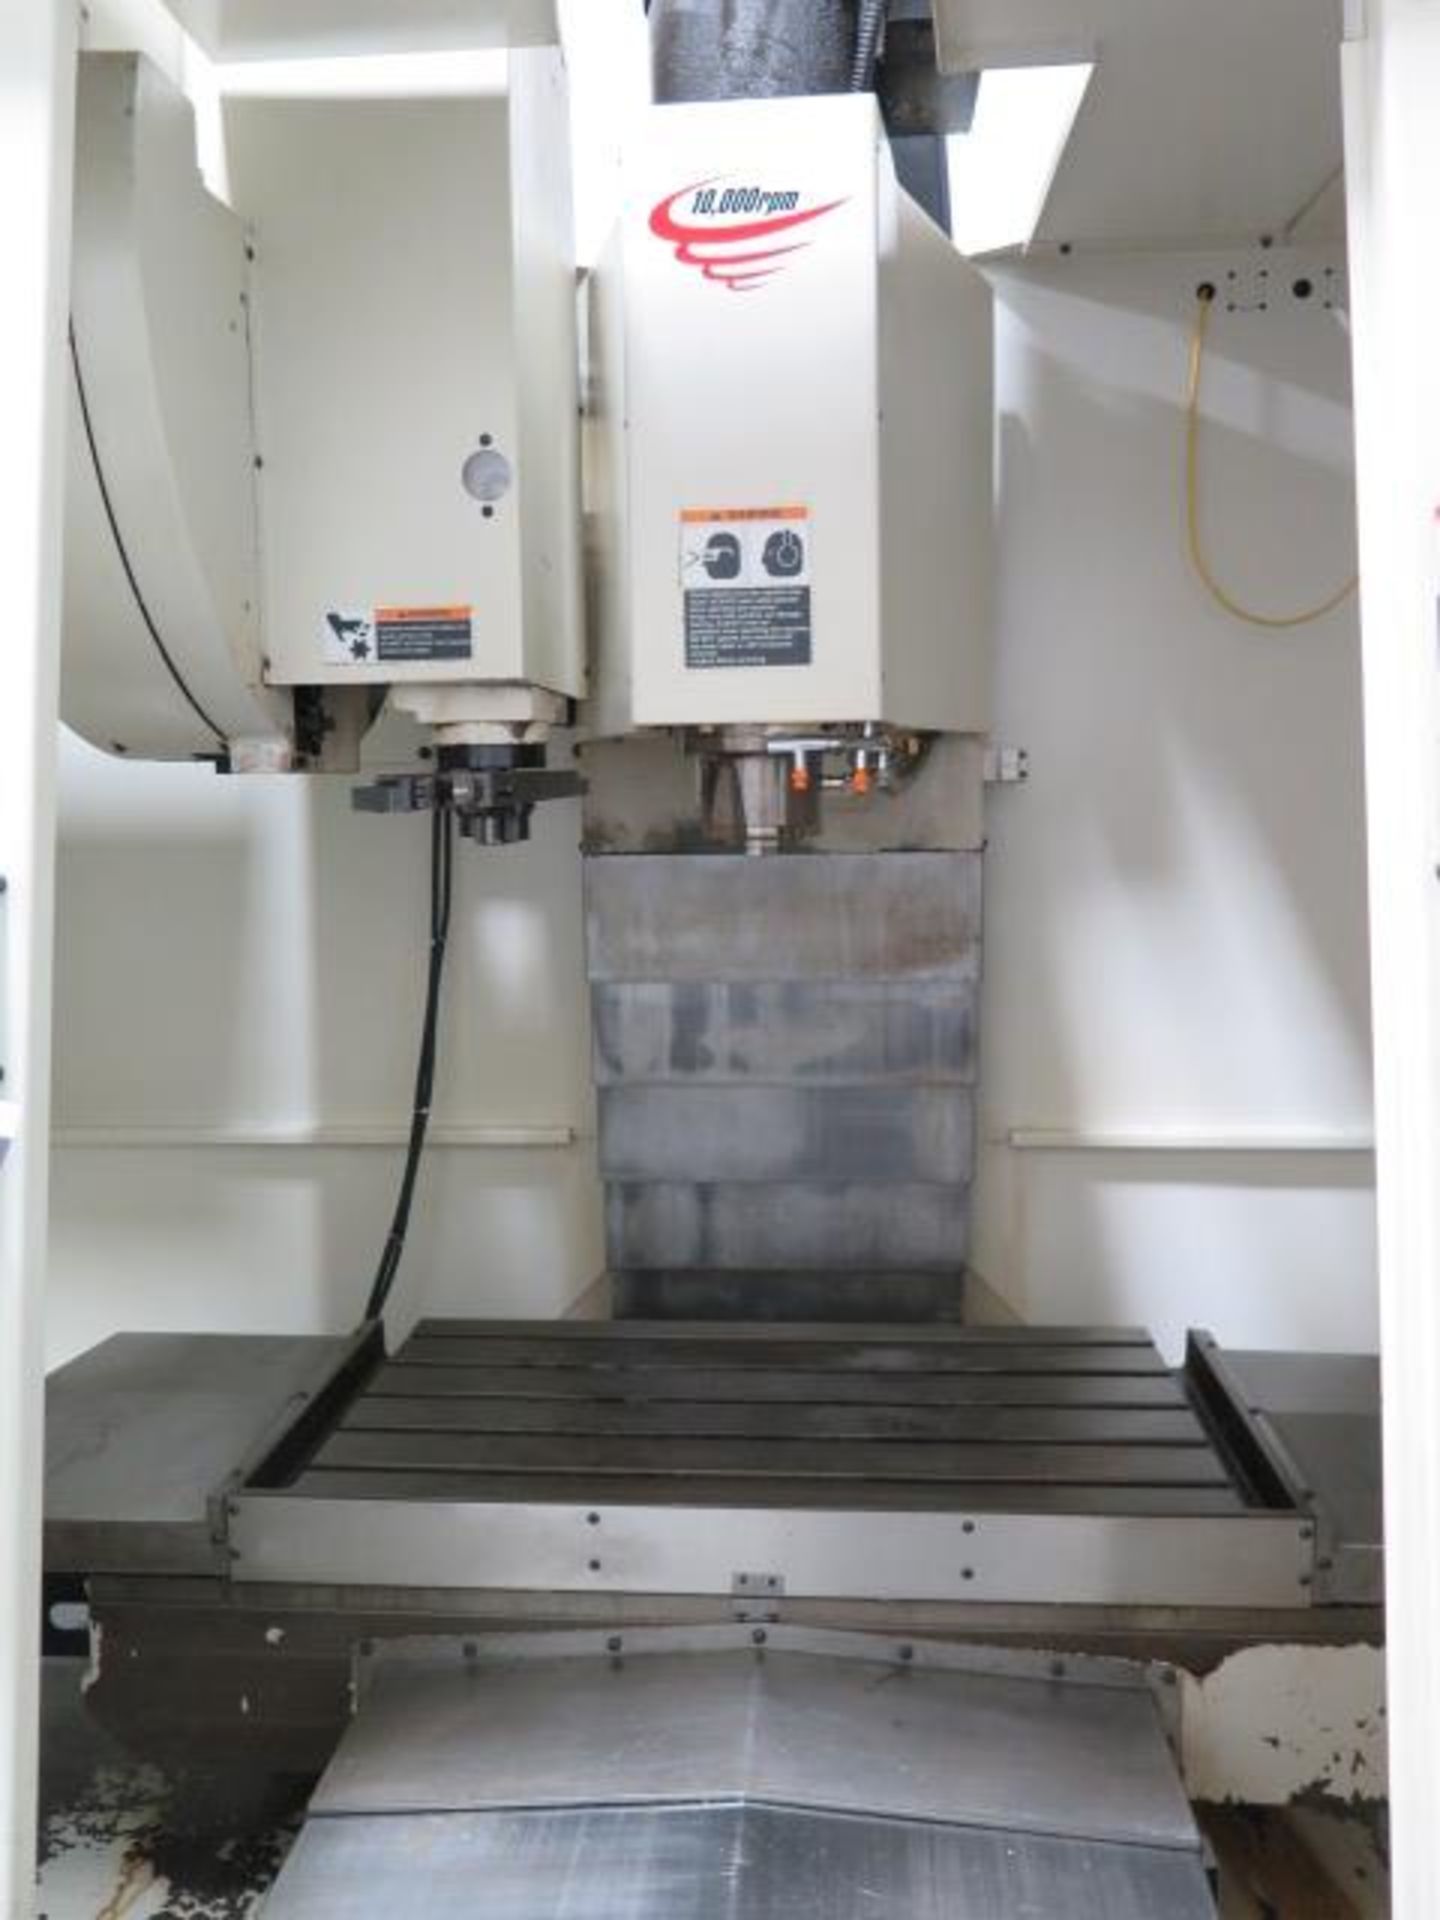 2003 Fadal VMC3020 VHT CNC VMC s/n 032003065369 w/ Fadal CNC 32MP Controls, SOLD AS IS - Image 4 of 14